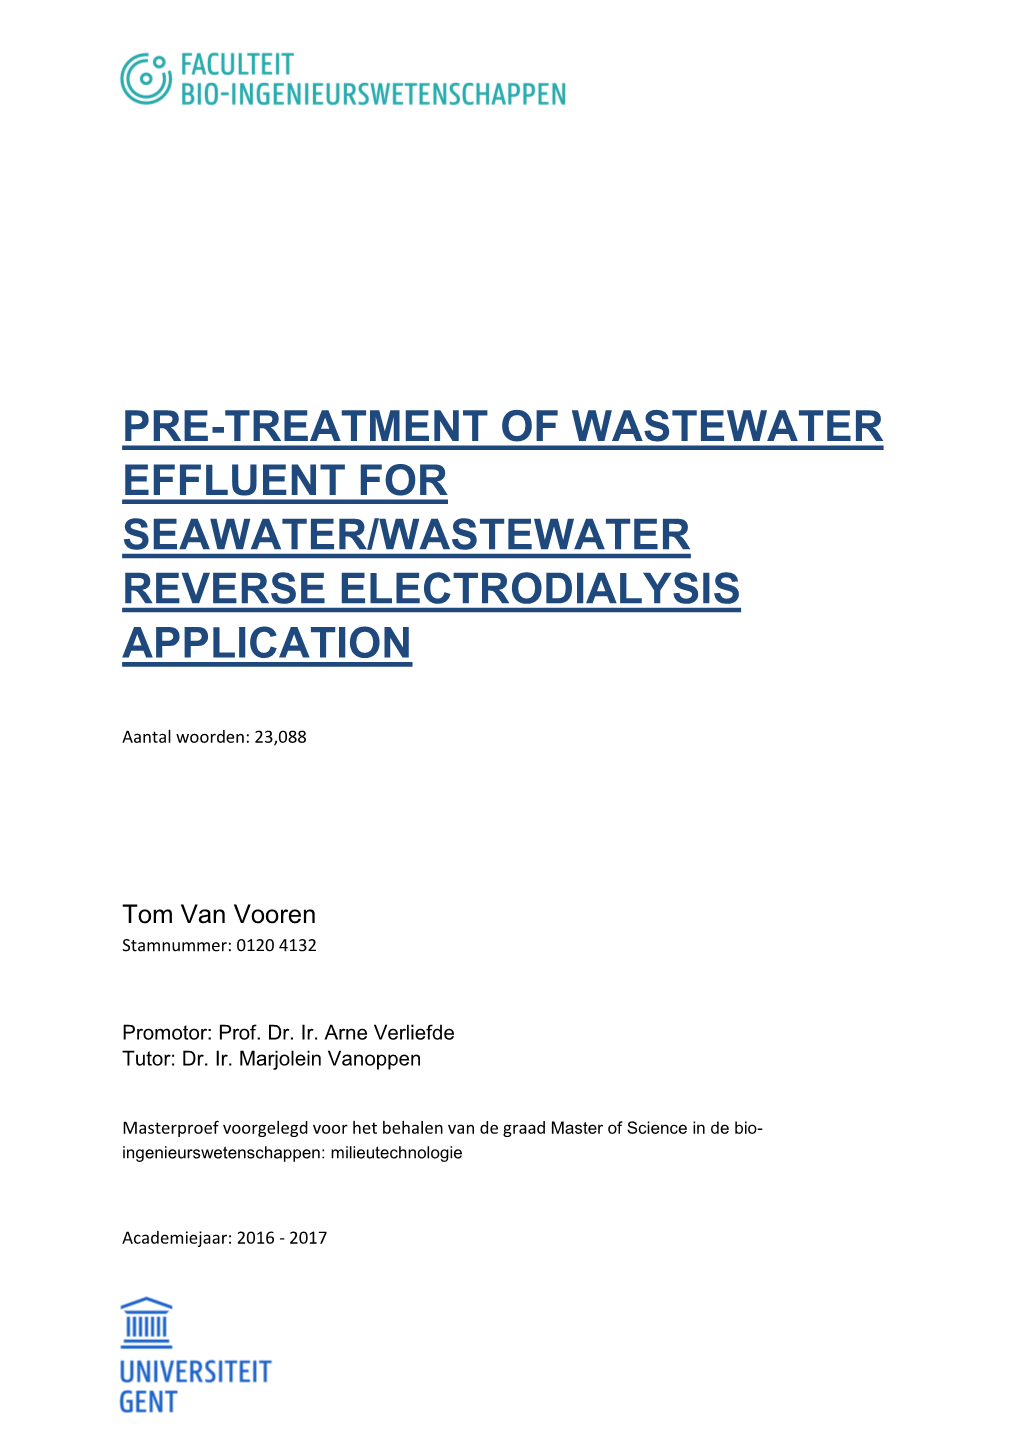 Pre-Treatment of Wastewater Effluent for Seawater/Wastewater Reverse Electrodialysis Application